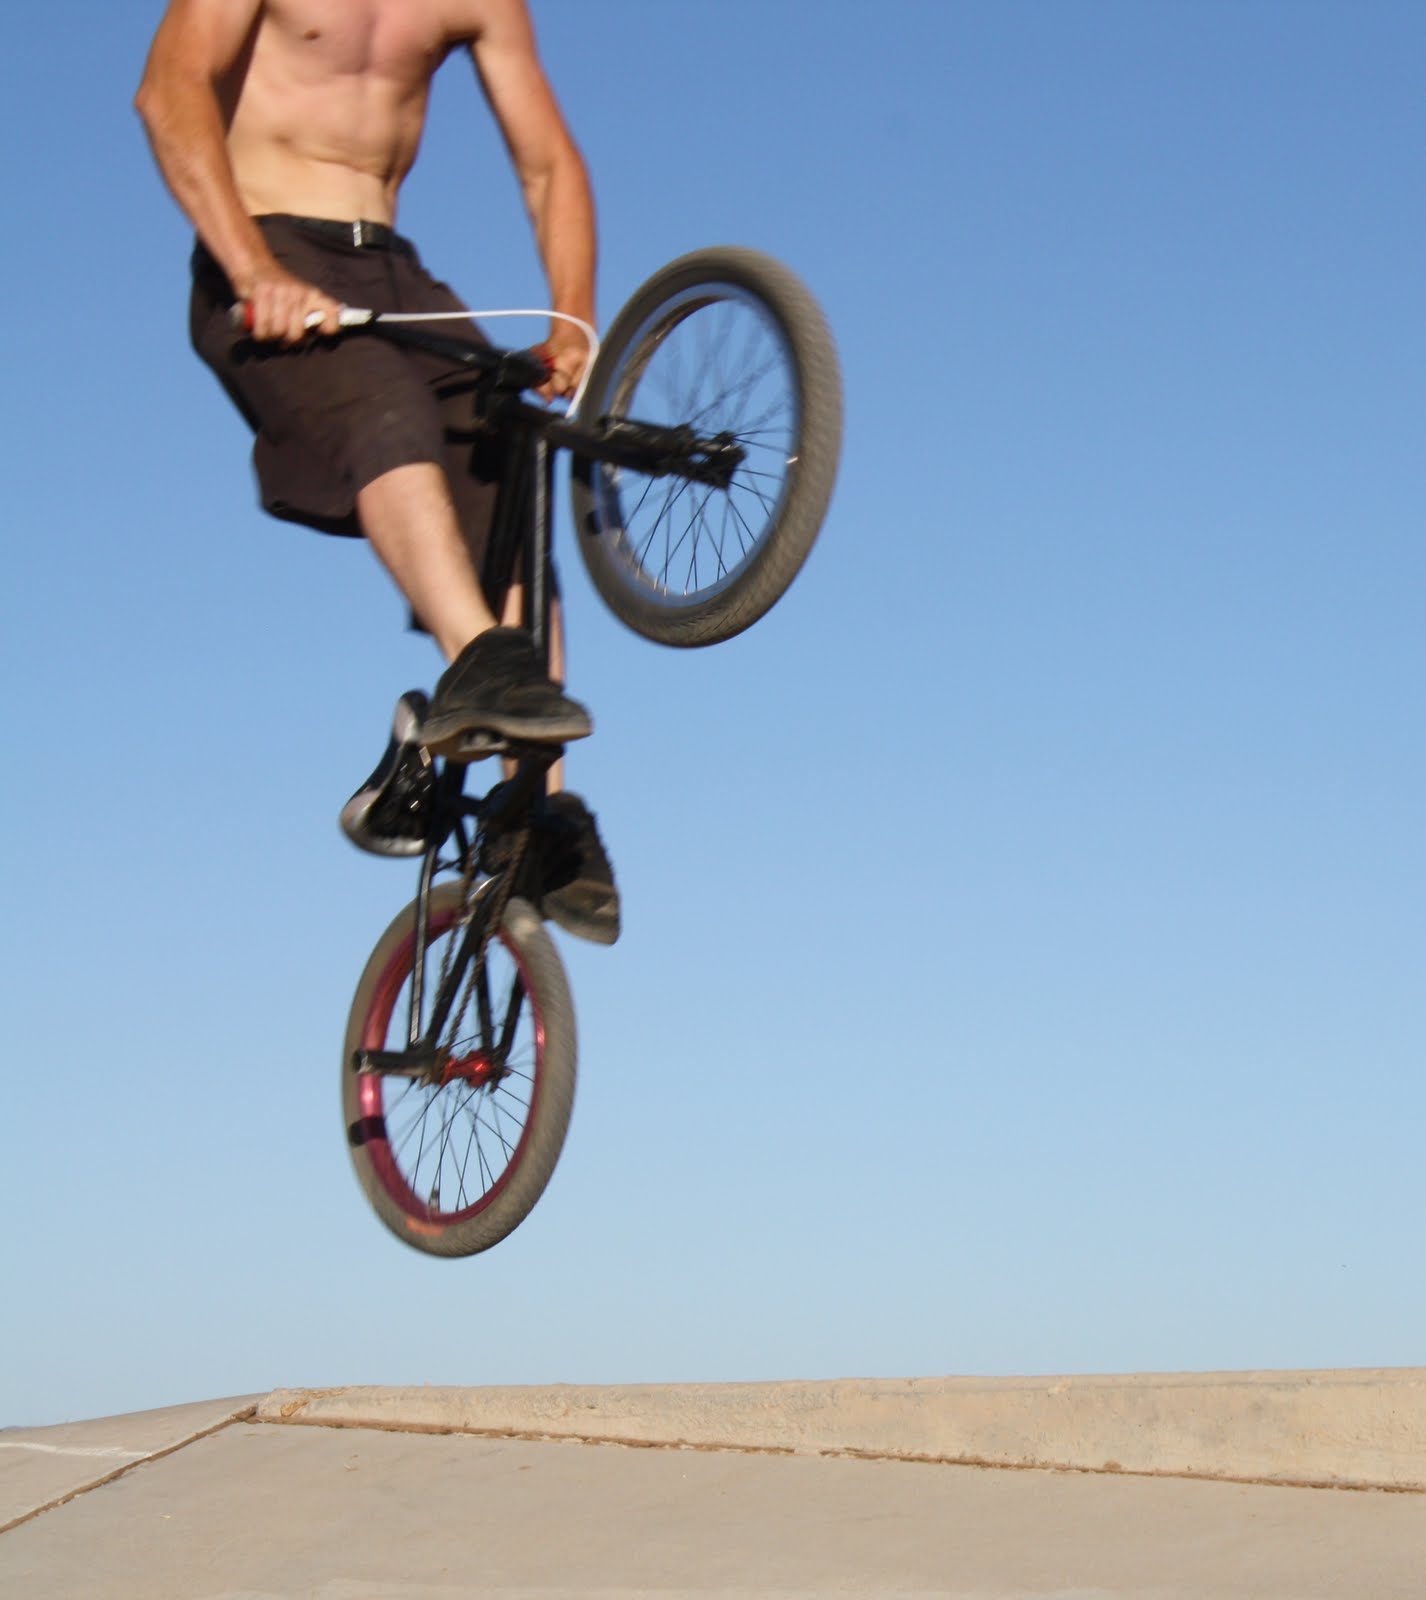 Jump and trick with bike